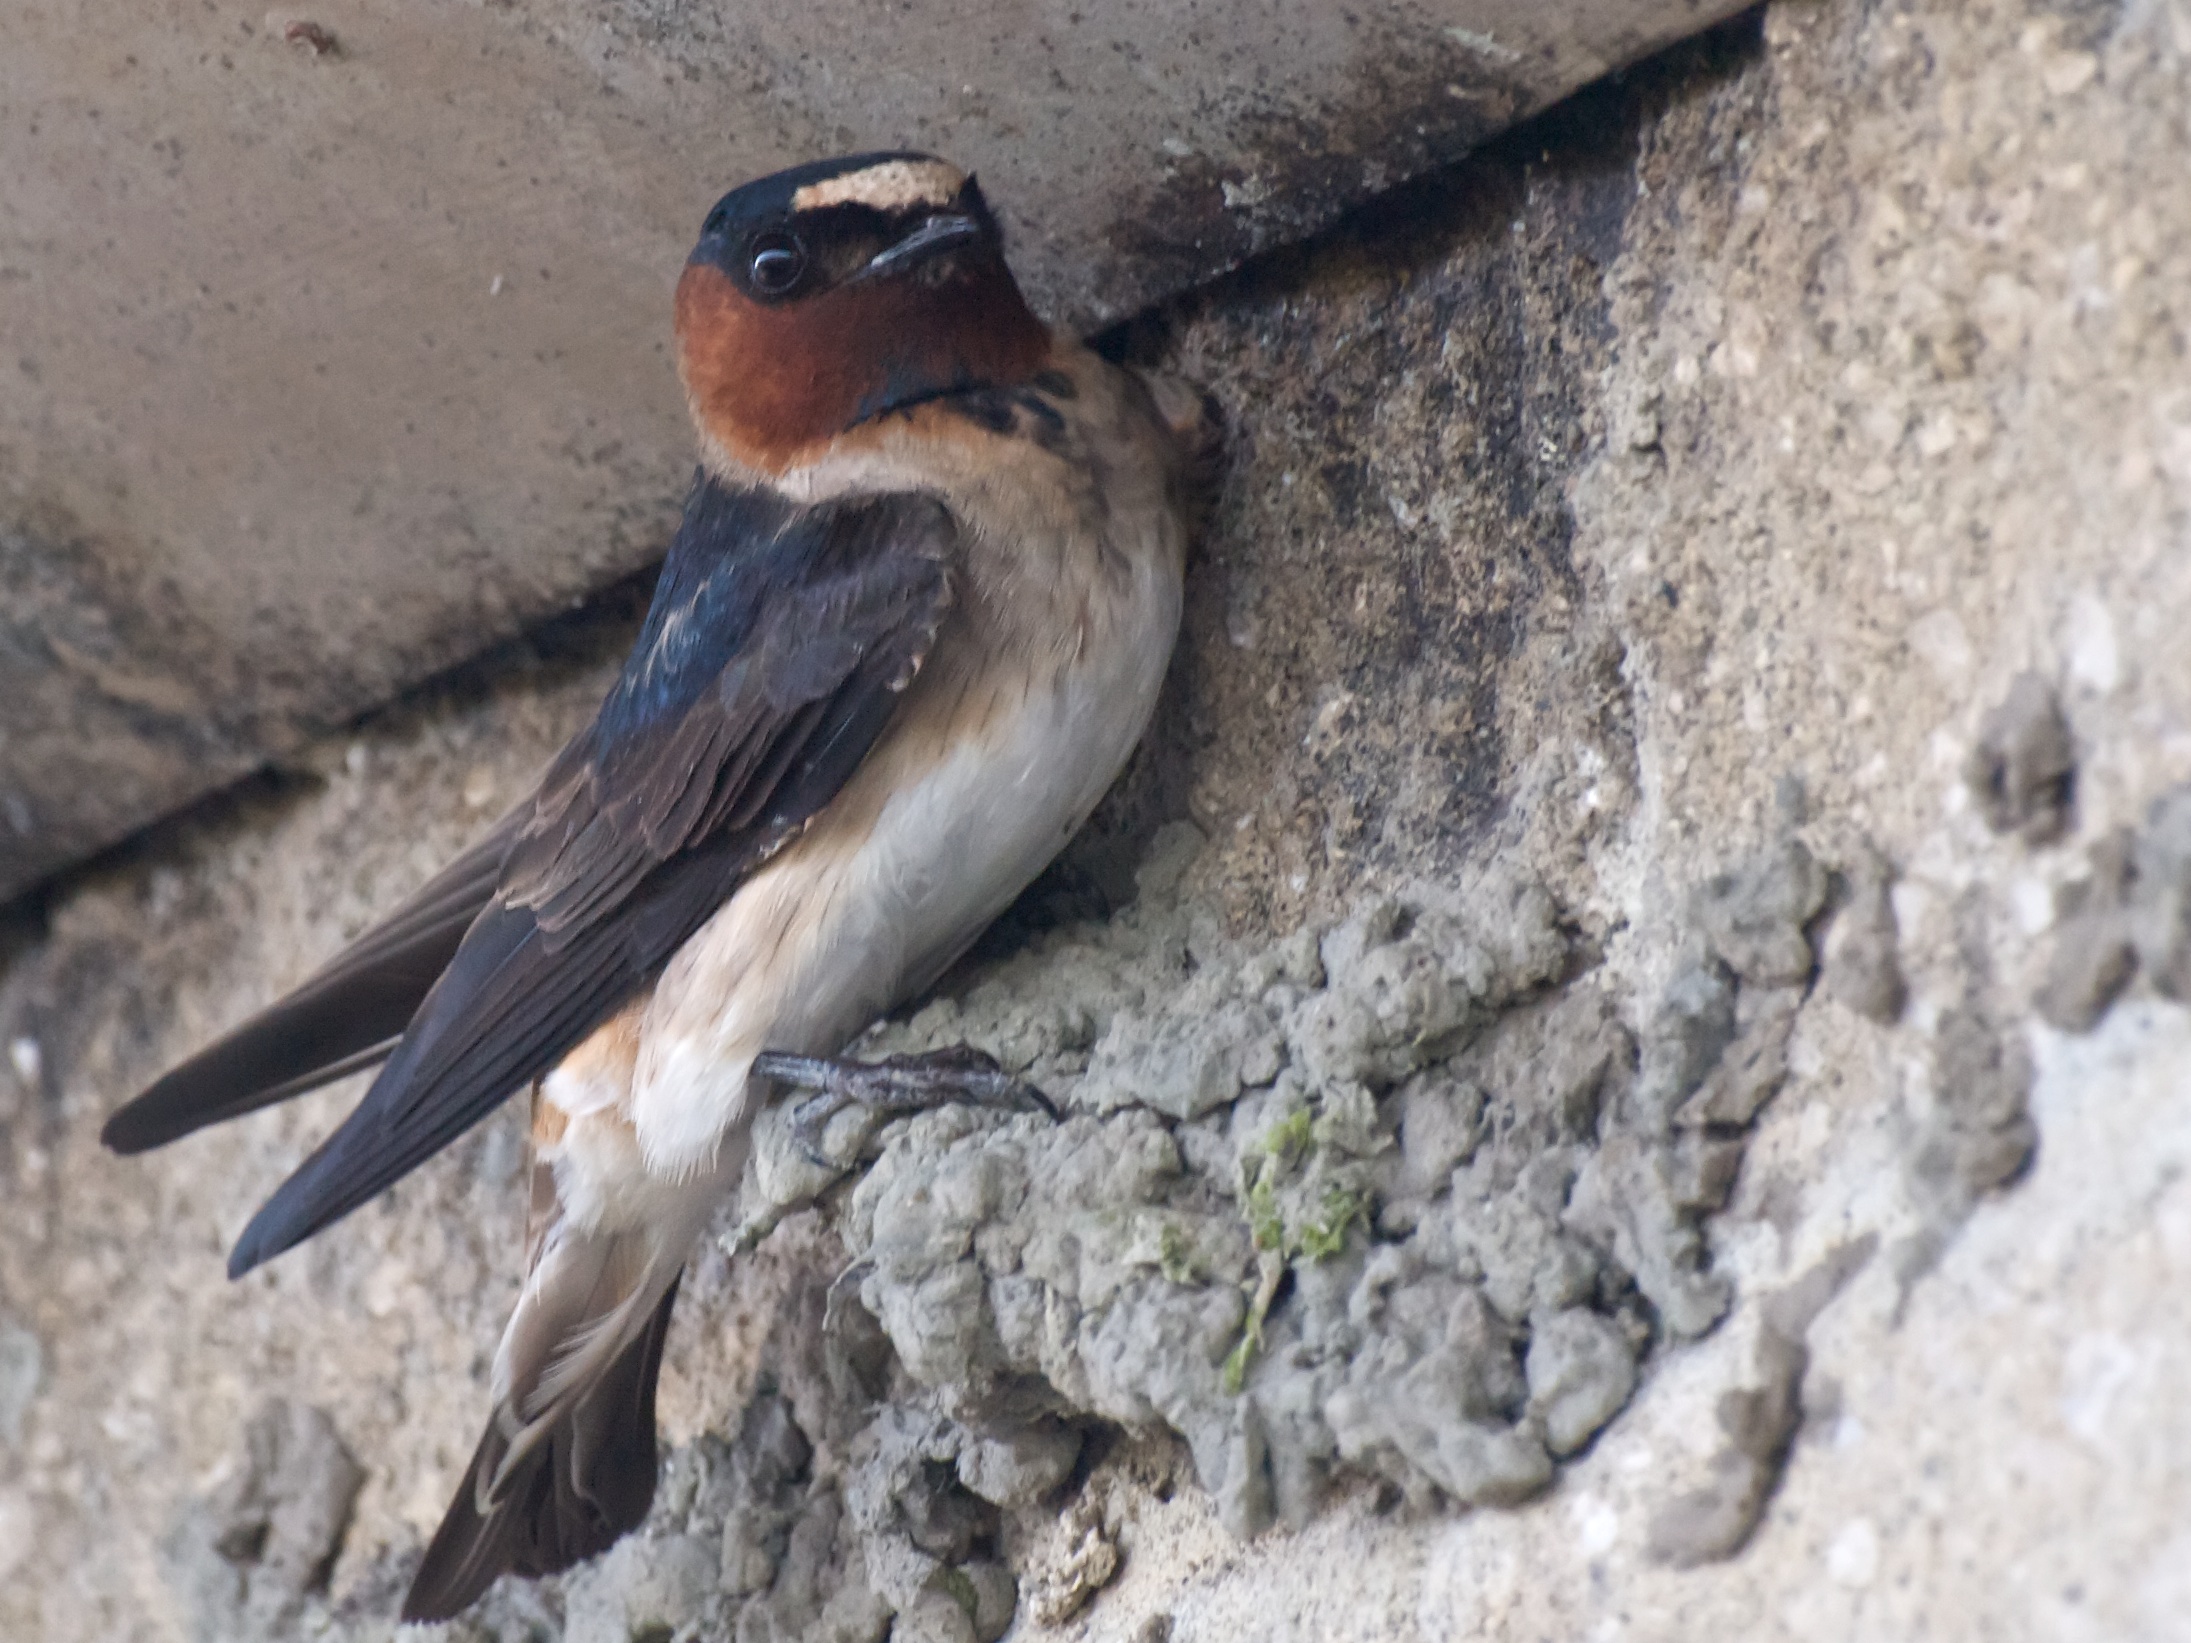 File:Cliff Swallow Builder.jpg - Wikimedia Commons